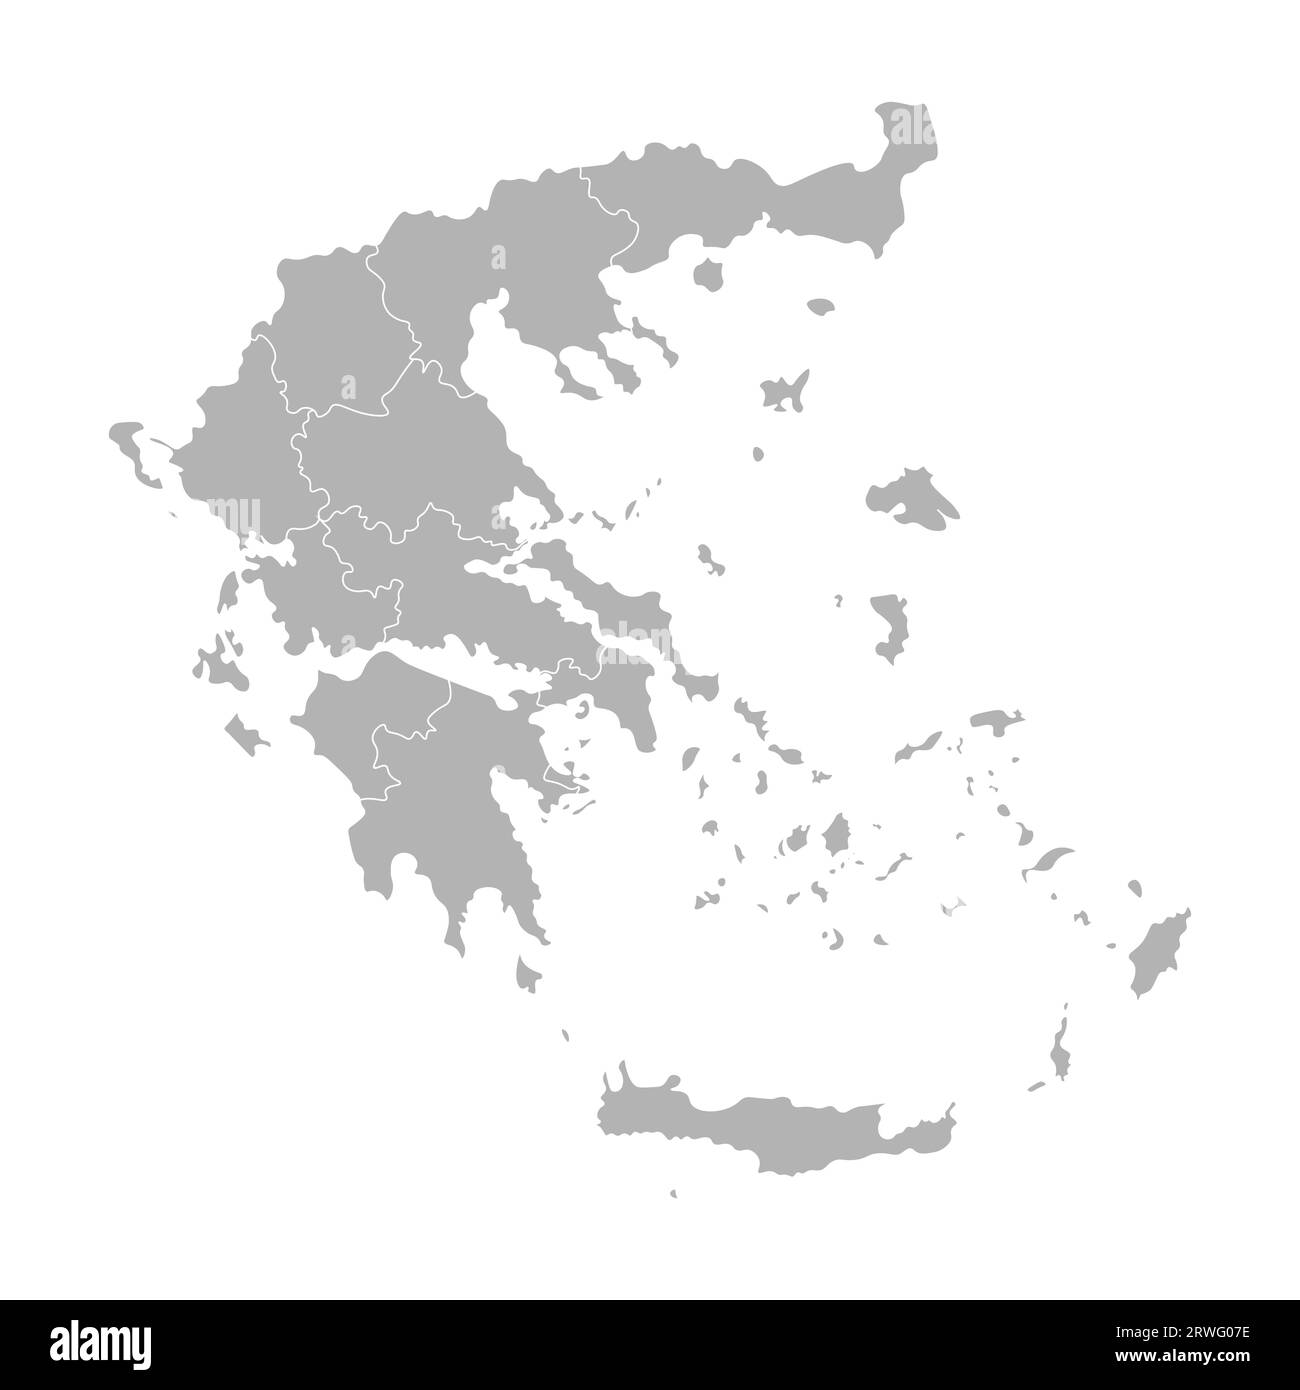 Vector isolated illustration of simplified administrative map of Greece. Borders of the provinces (regions). Grey silhouettes. White outline. Stock Vector